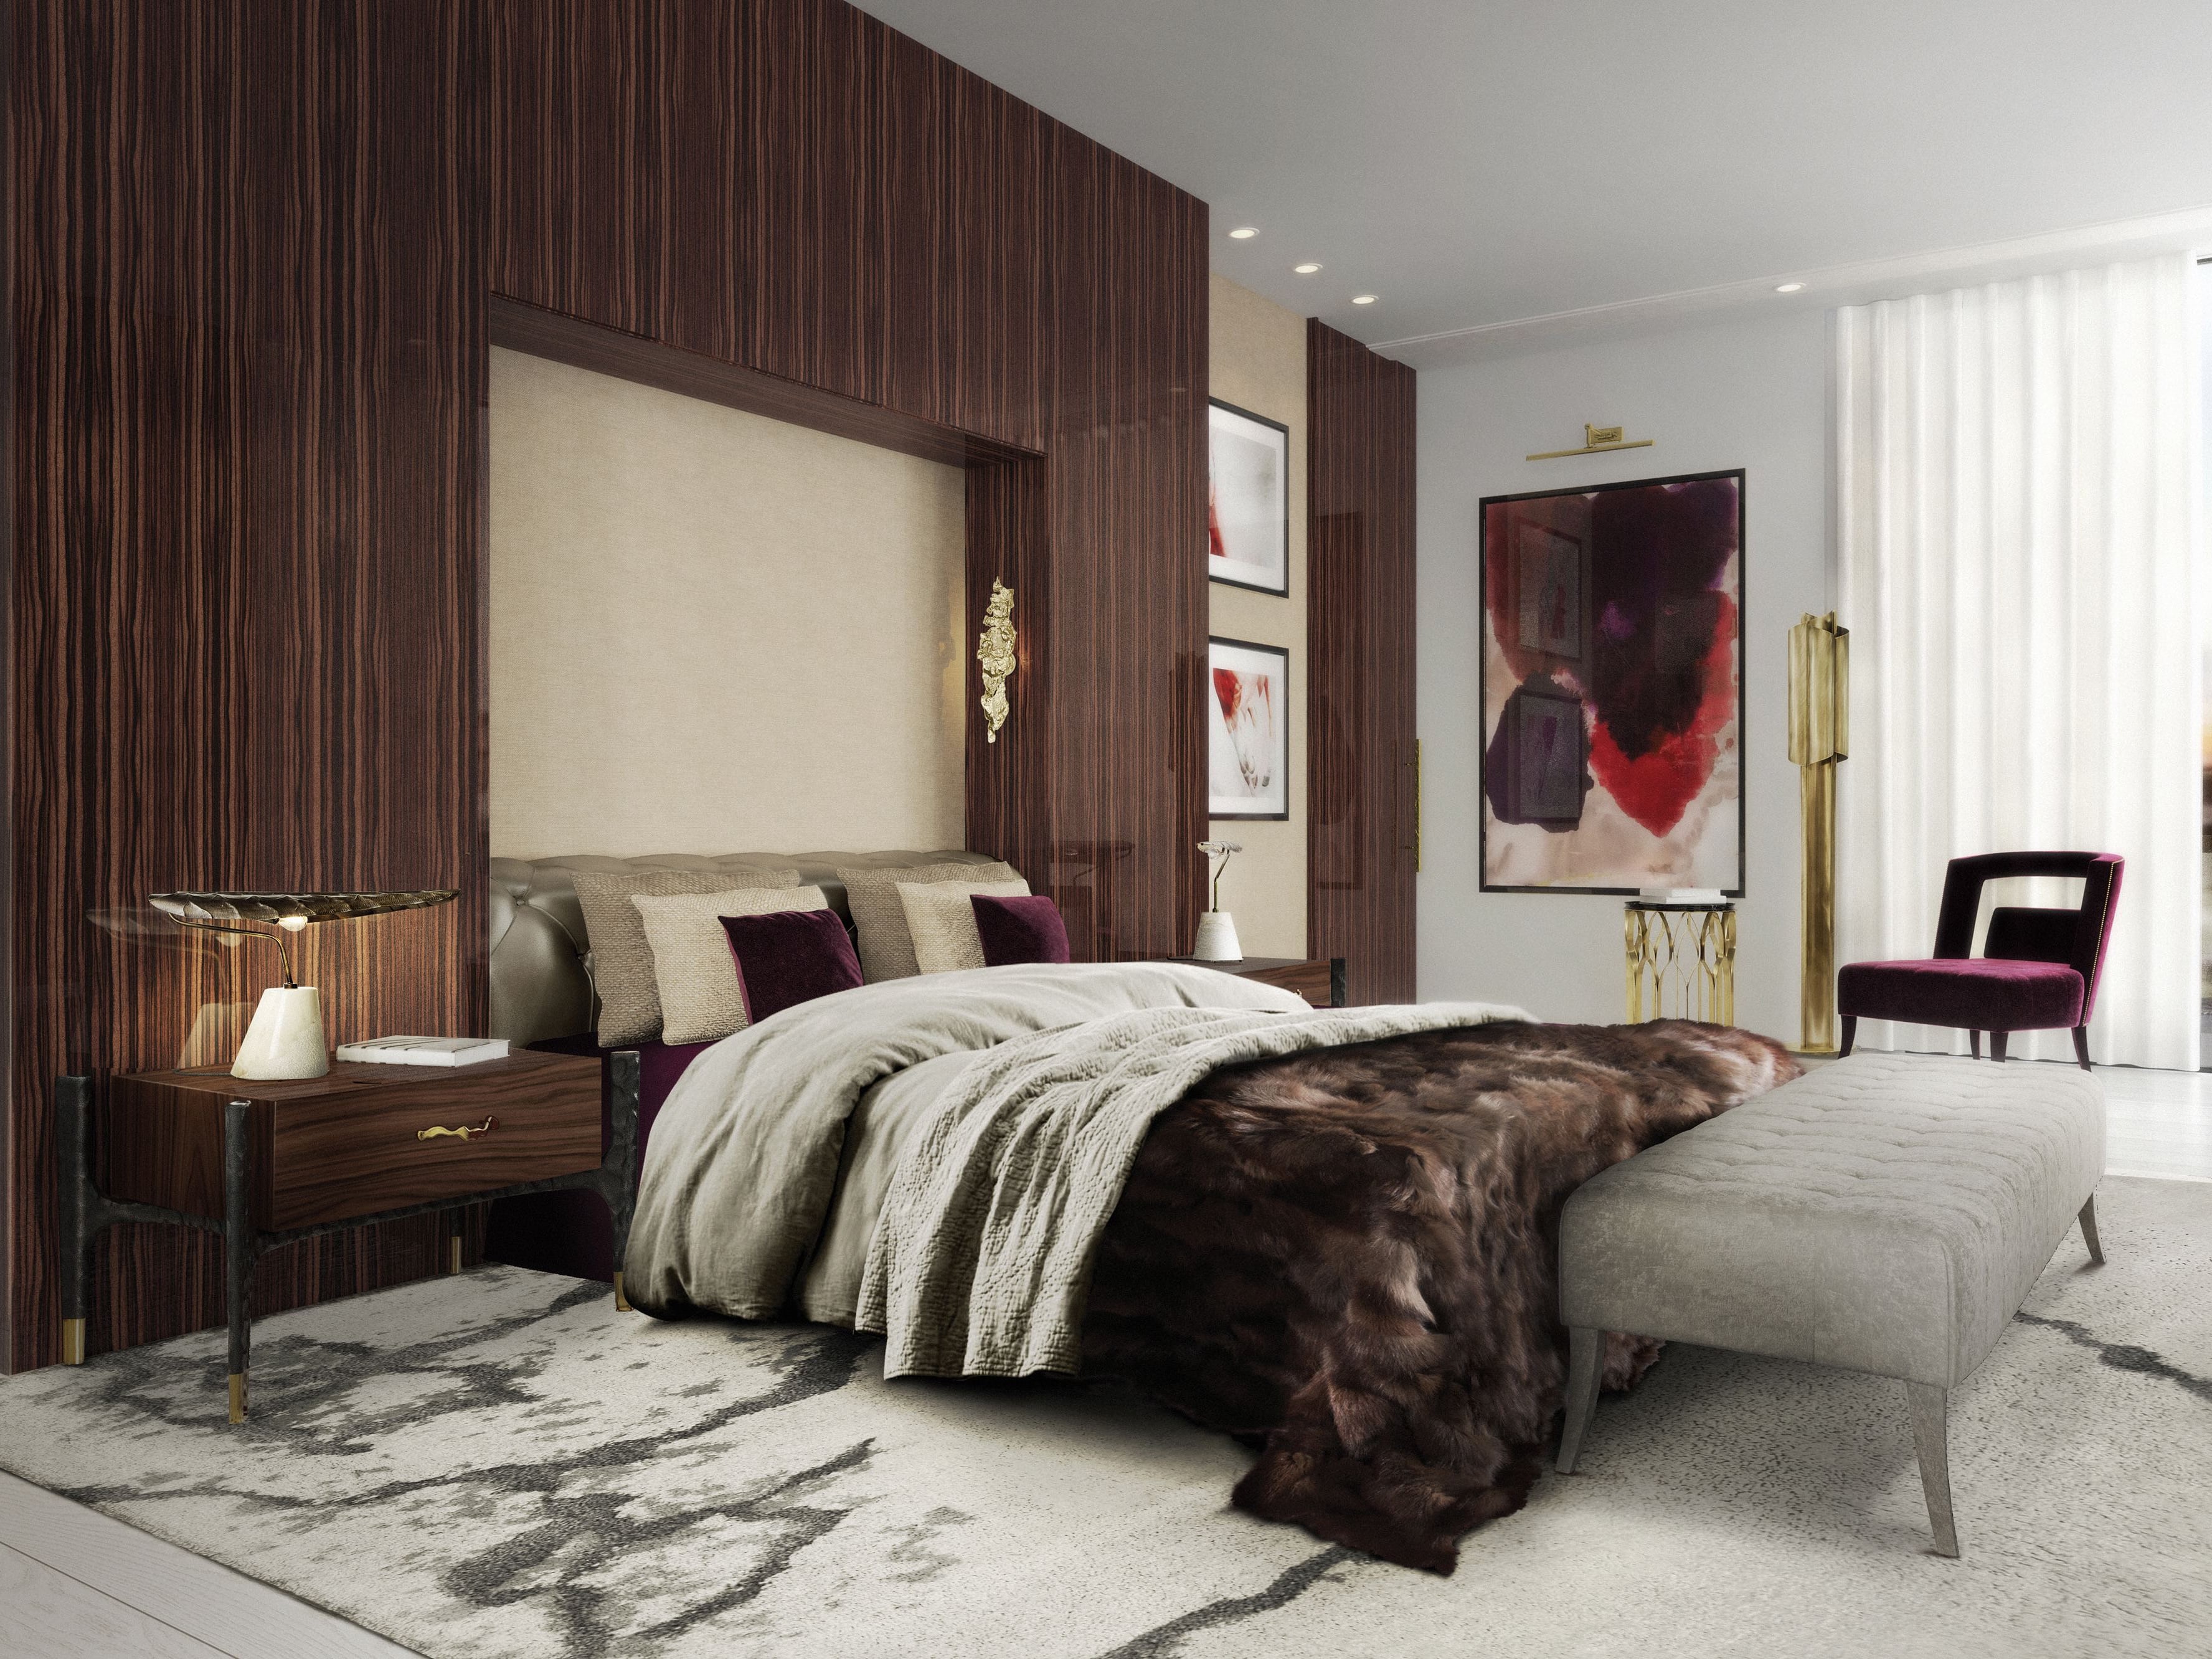 Beautiful Bedroom With Brown Tones And Golden Details - Home'Society